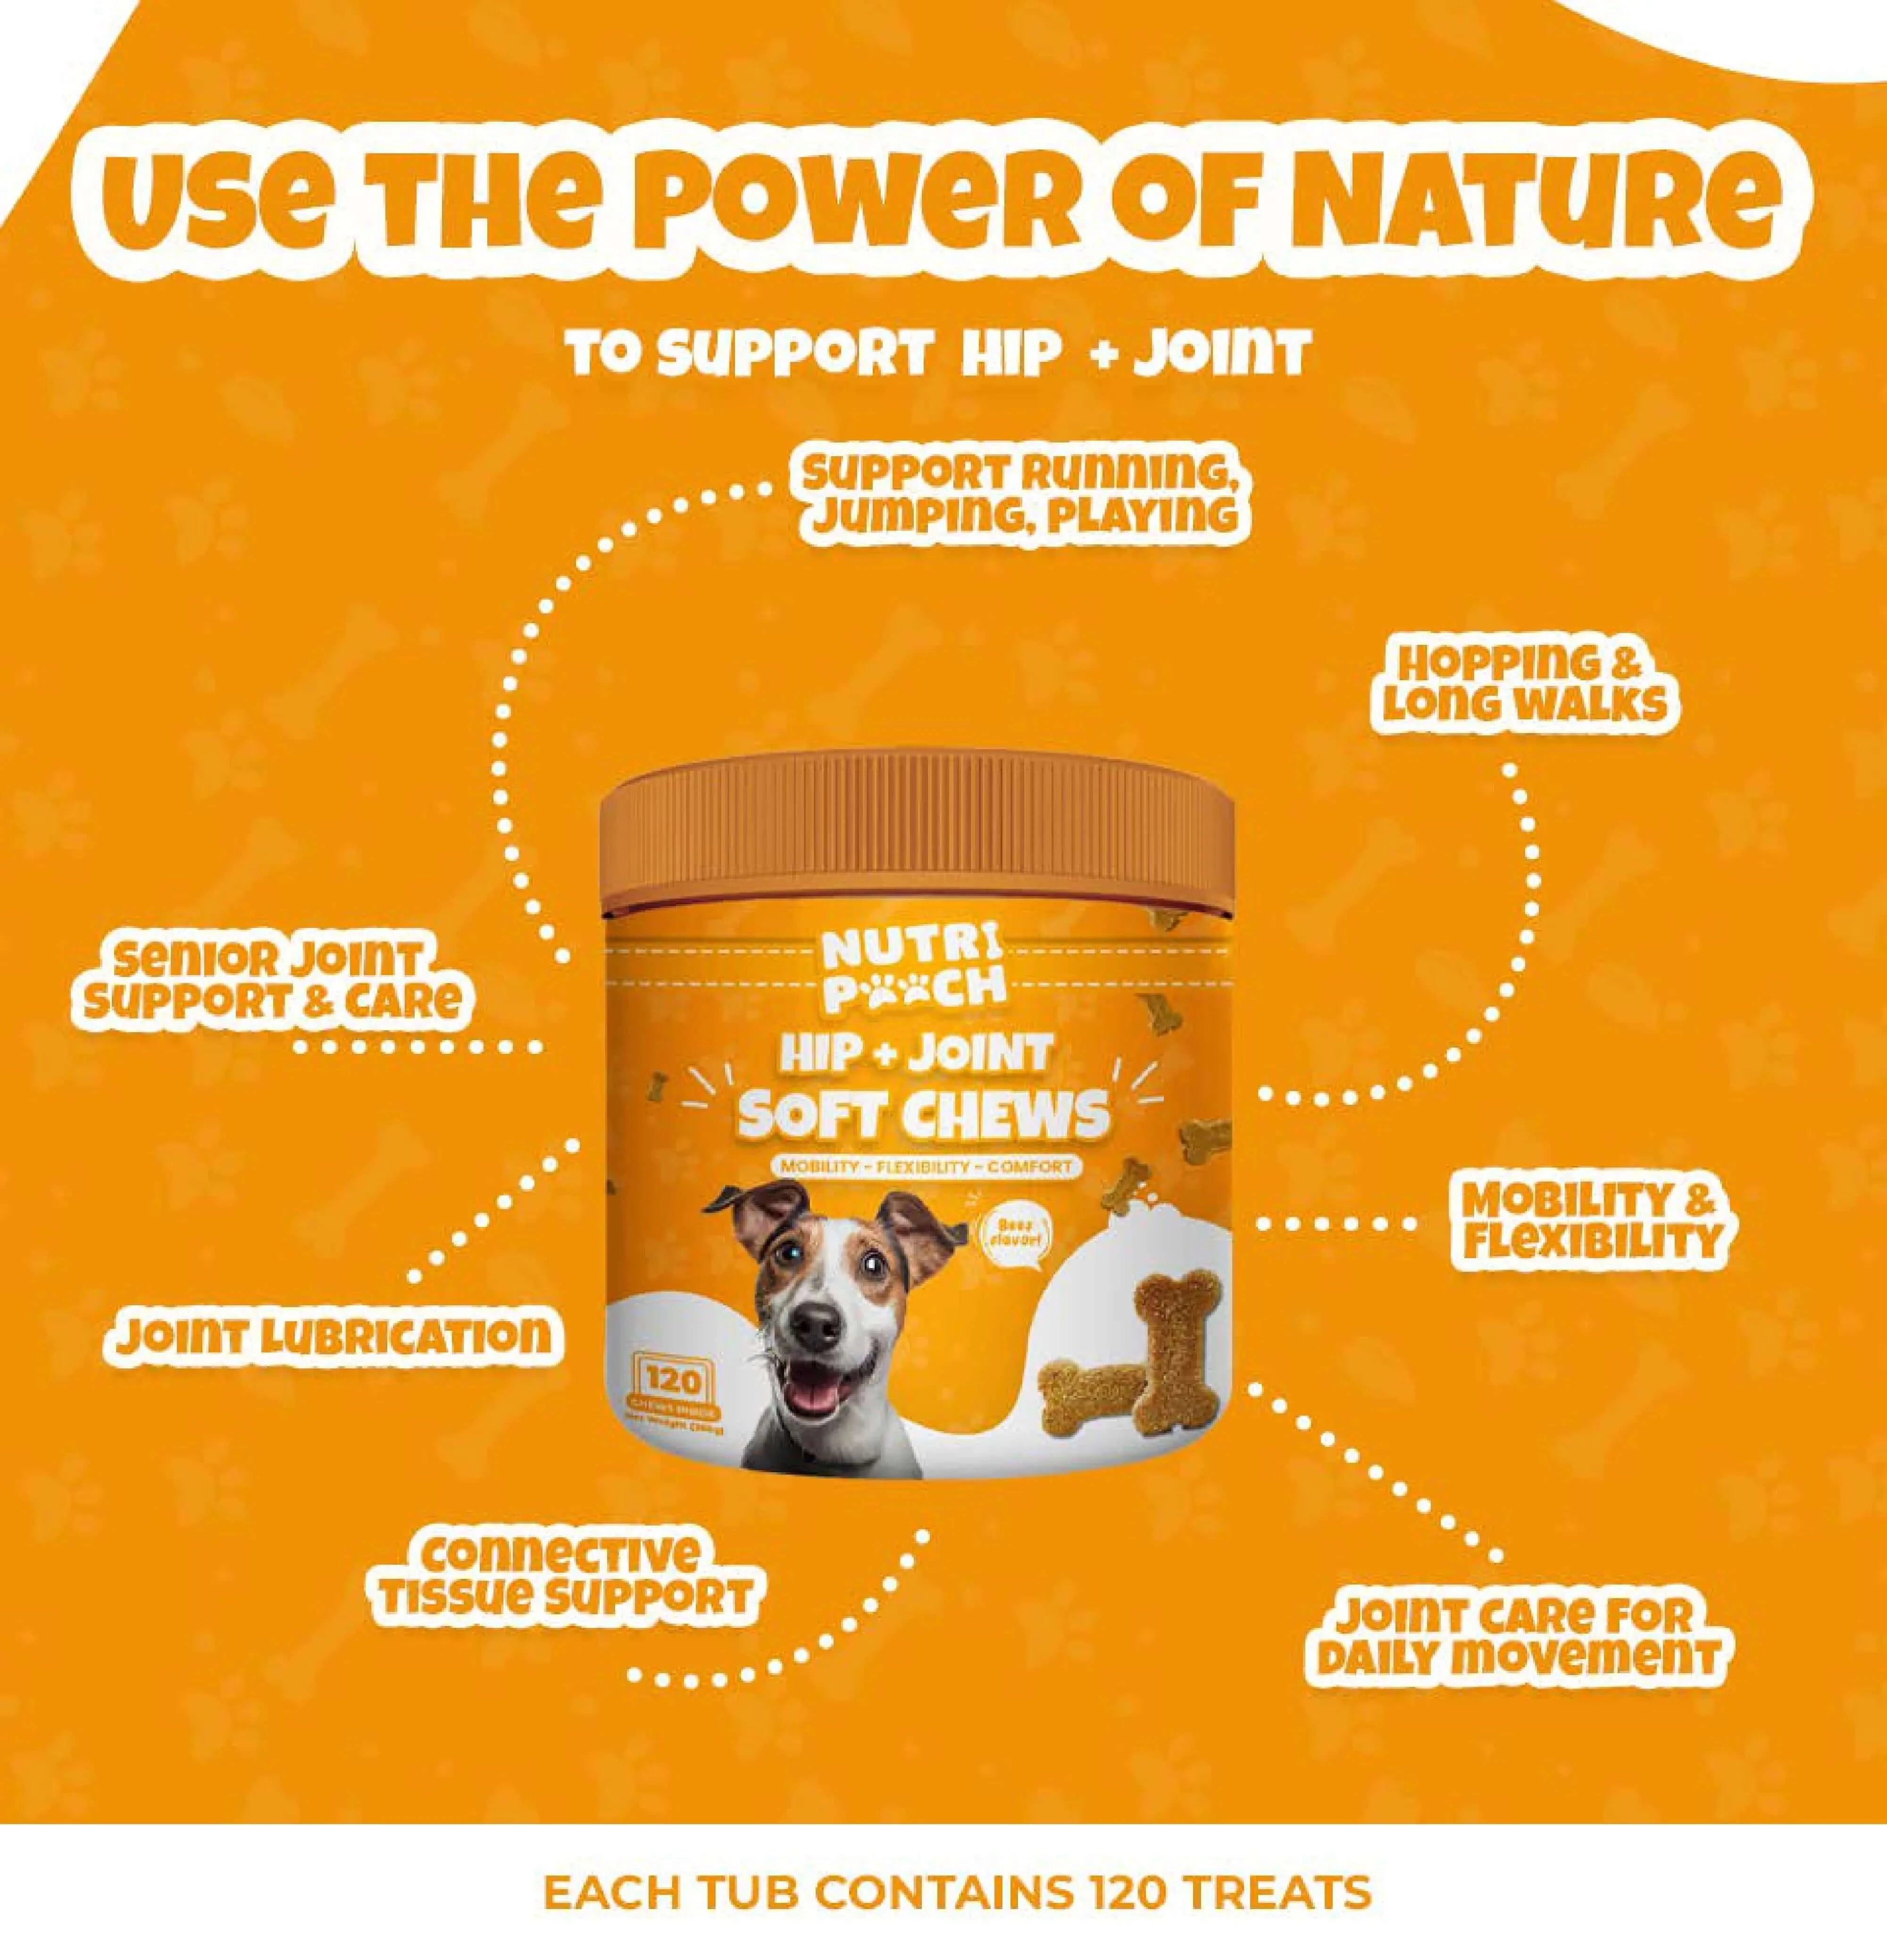 Hip + Joint Soft Chews